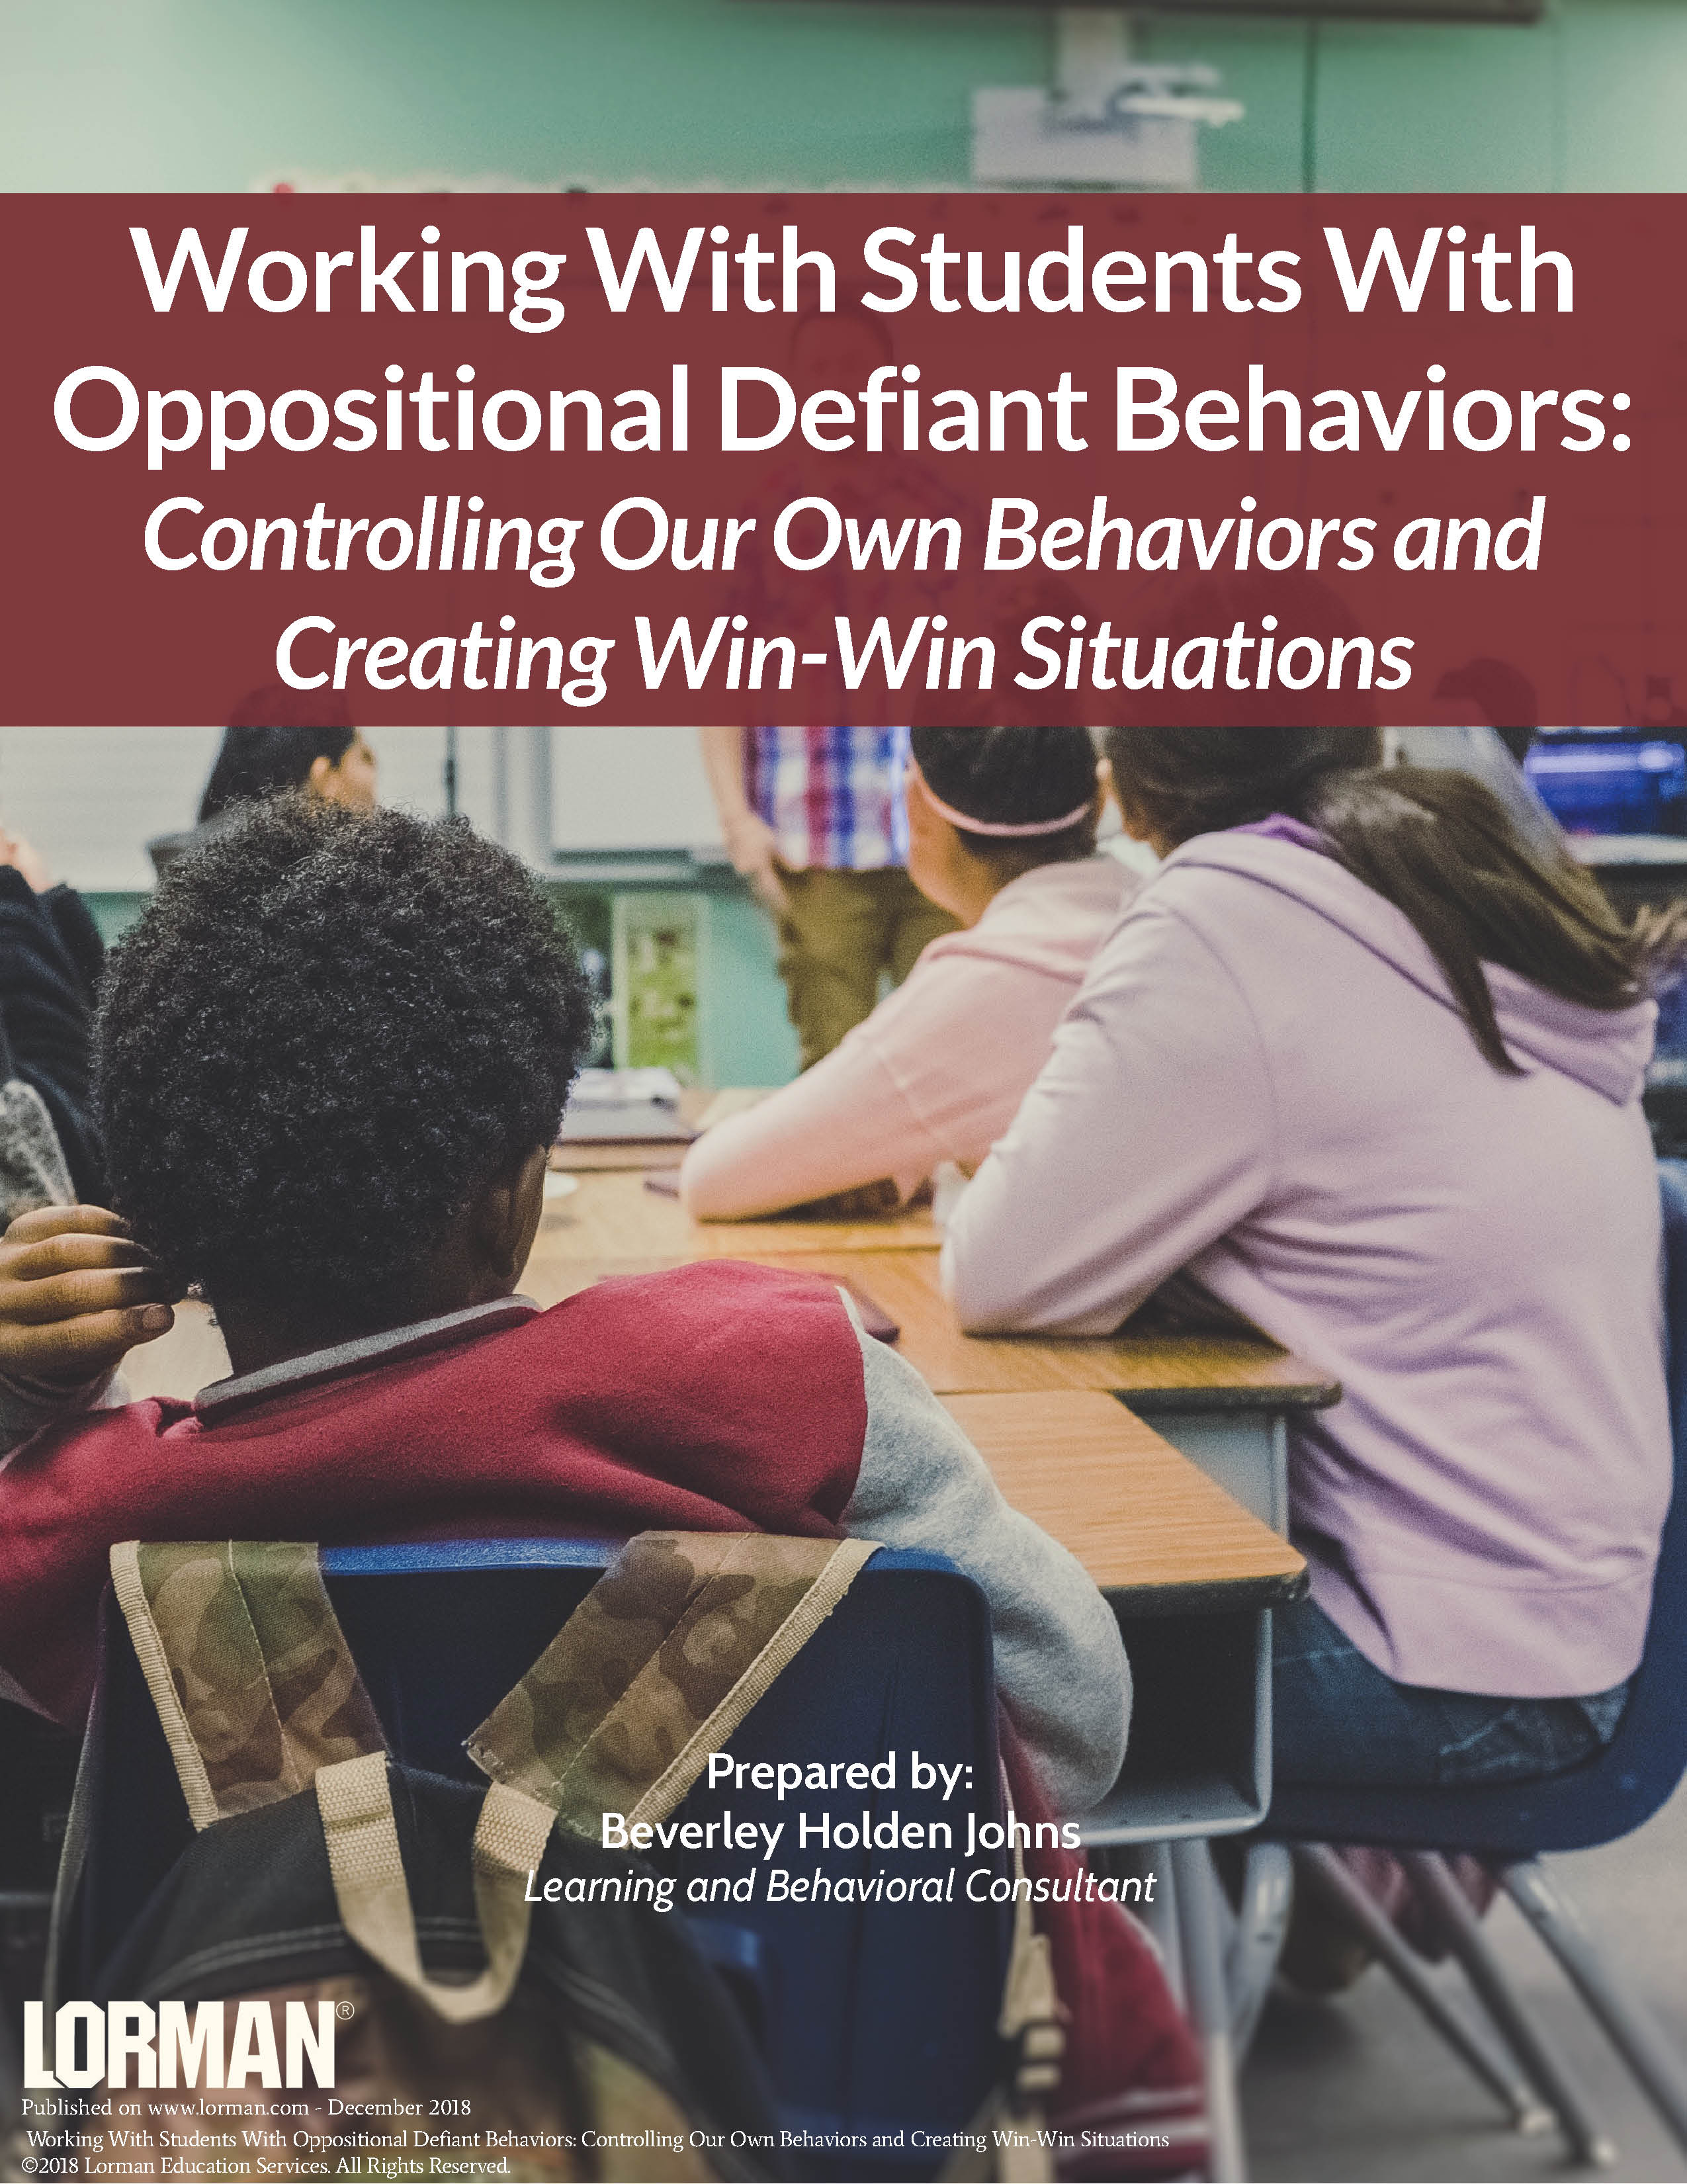 Working with Students With Oppositional Defiant Disorder - Controlling Our Own Behavior